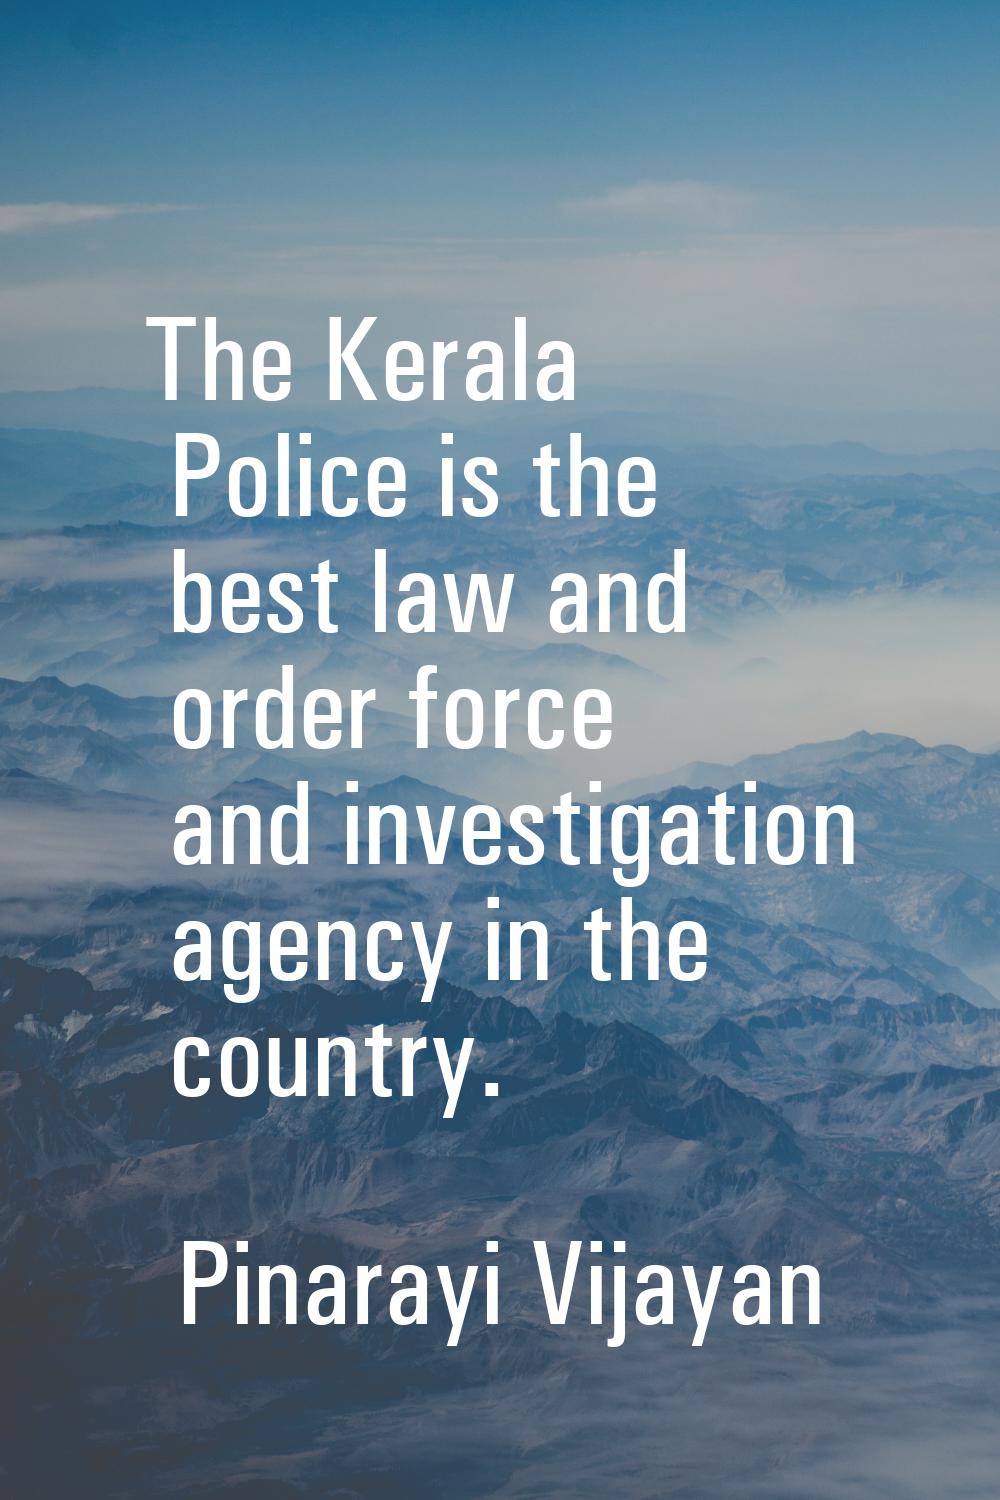 The Kerala Police is the best law and order force and investigation agency in the country.